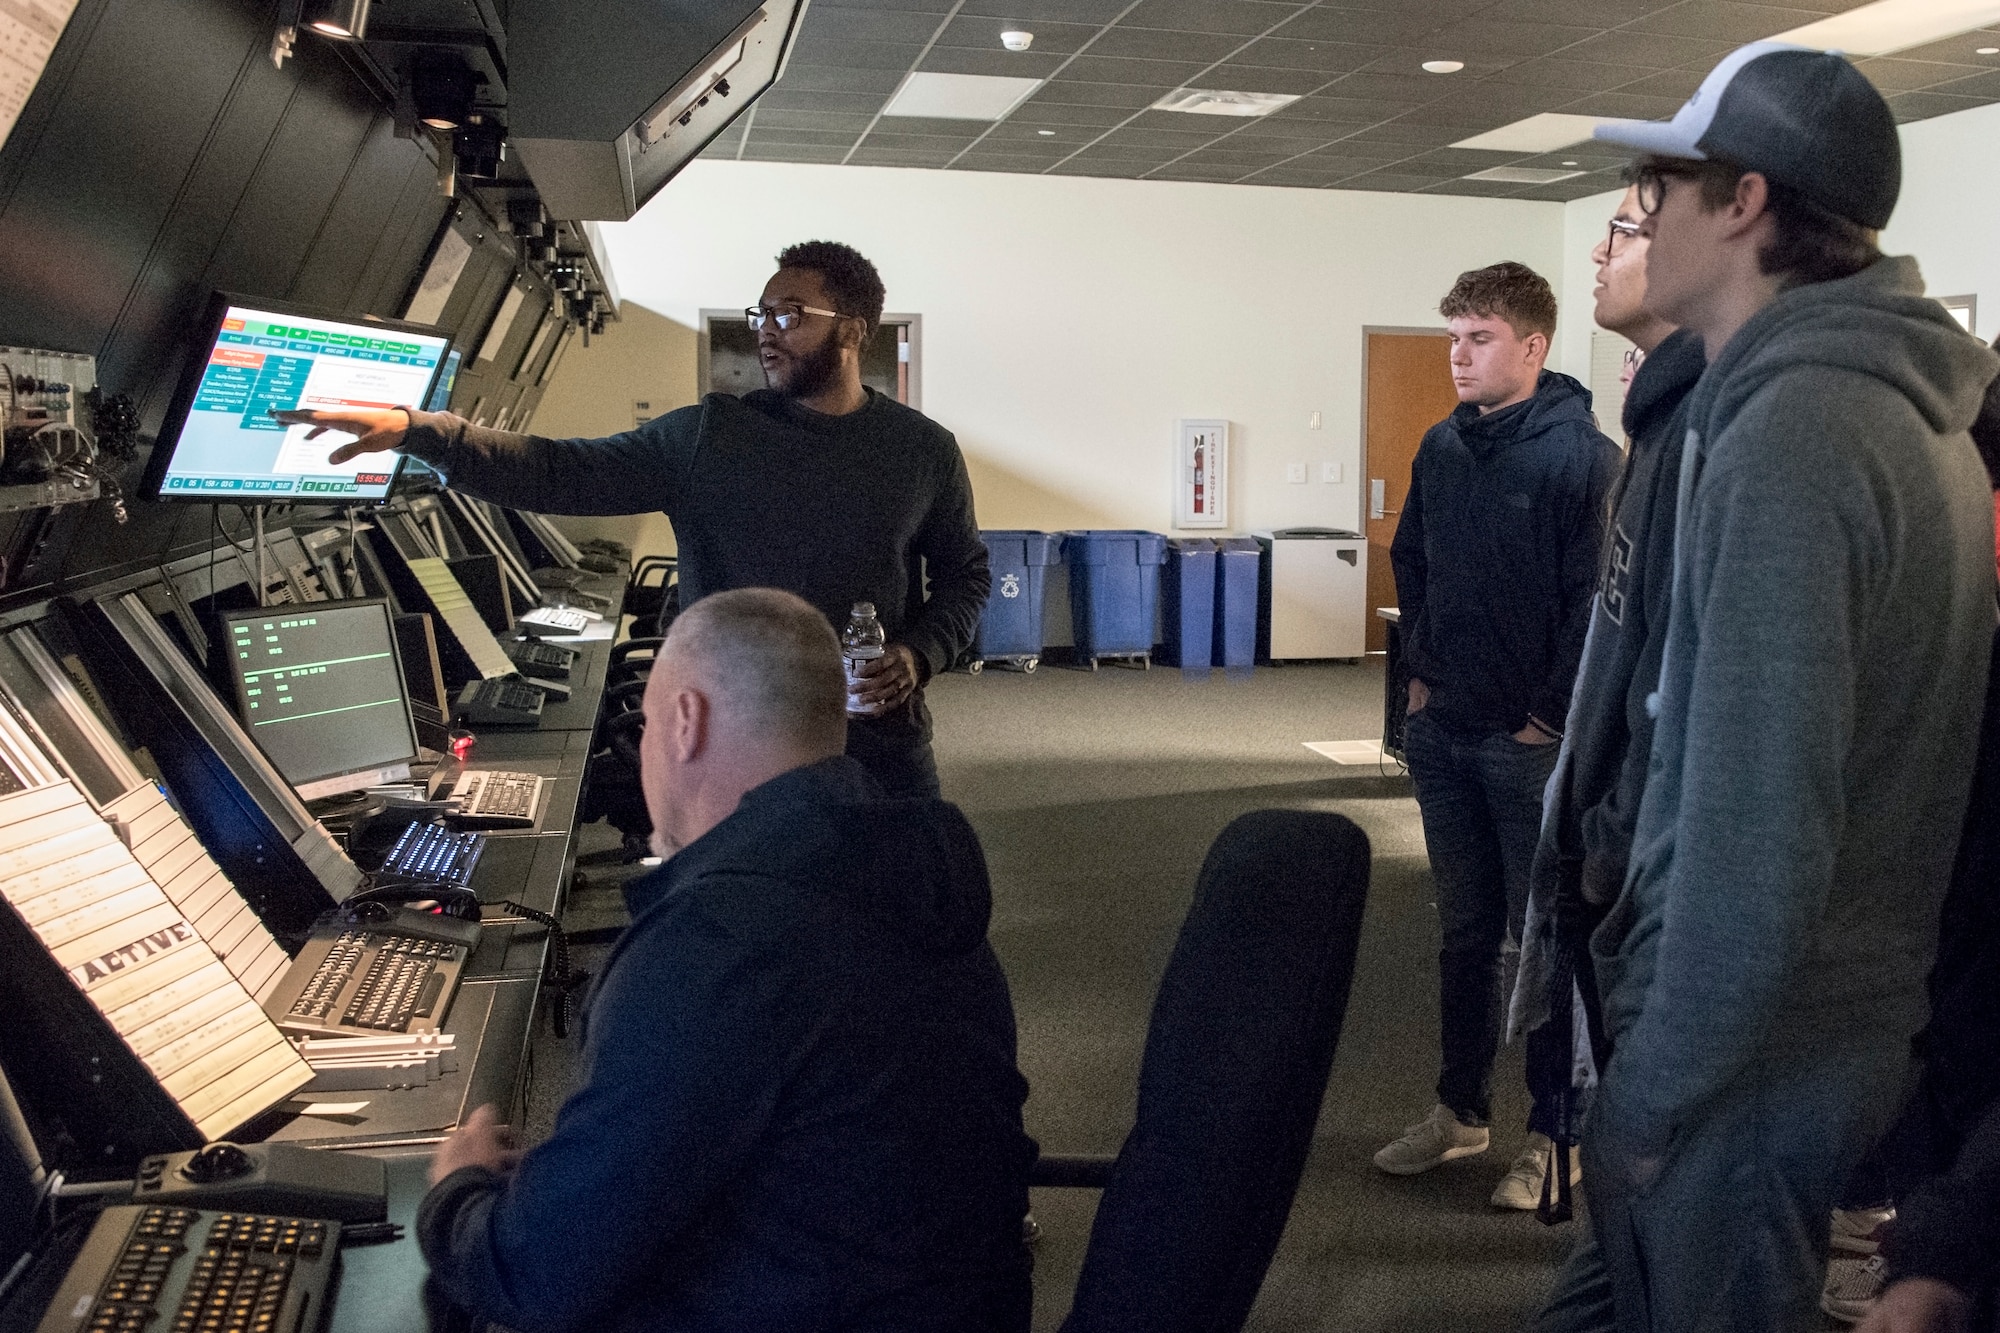 Anthony Morgan, 434th Operations Support Squadron air traffic control specialist, shows students from Purdue University, Indiana, the radar approach control center during a tour at Grissom Air Reserve Base, Ind., Nov. 17, 2019. Grissom ATC manages all commercial, civilian and military air traffic between Chicago and Indianapolis, going as far west as Lafayette, Ind., up to 10,000 feet. (U.S. Air Force photo/Master Sgt. Benjamin Mota)